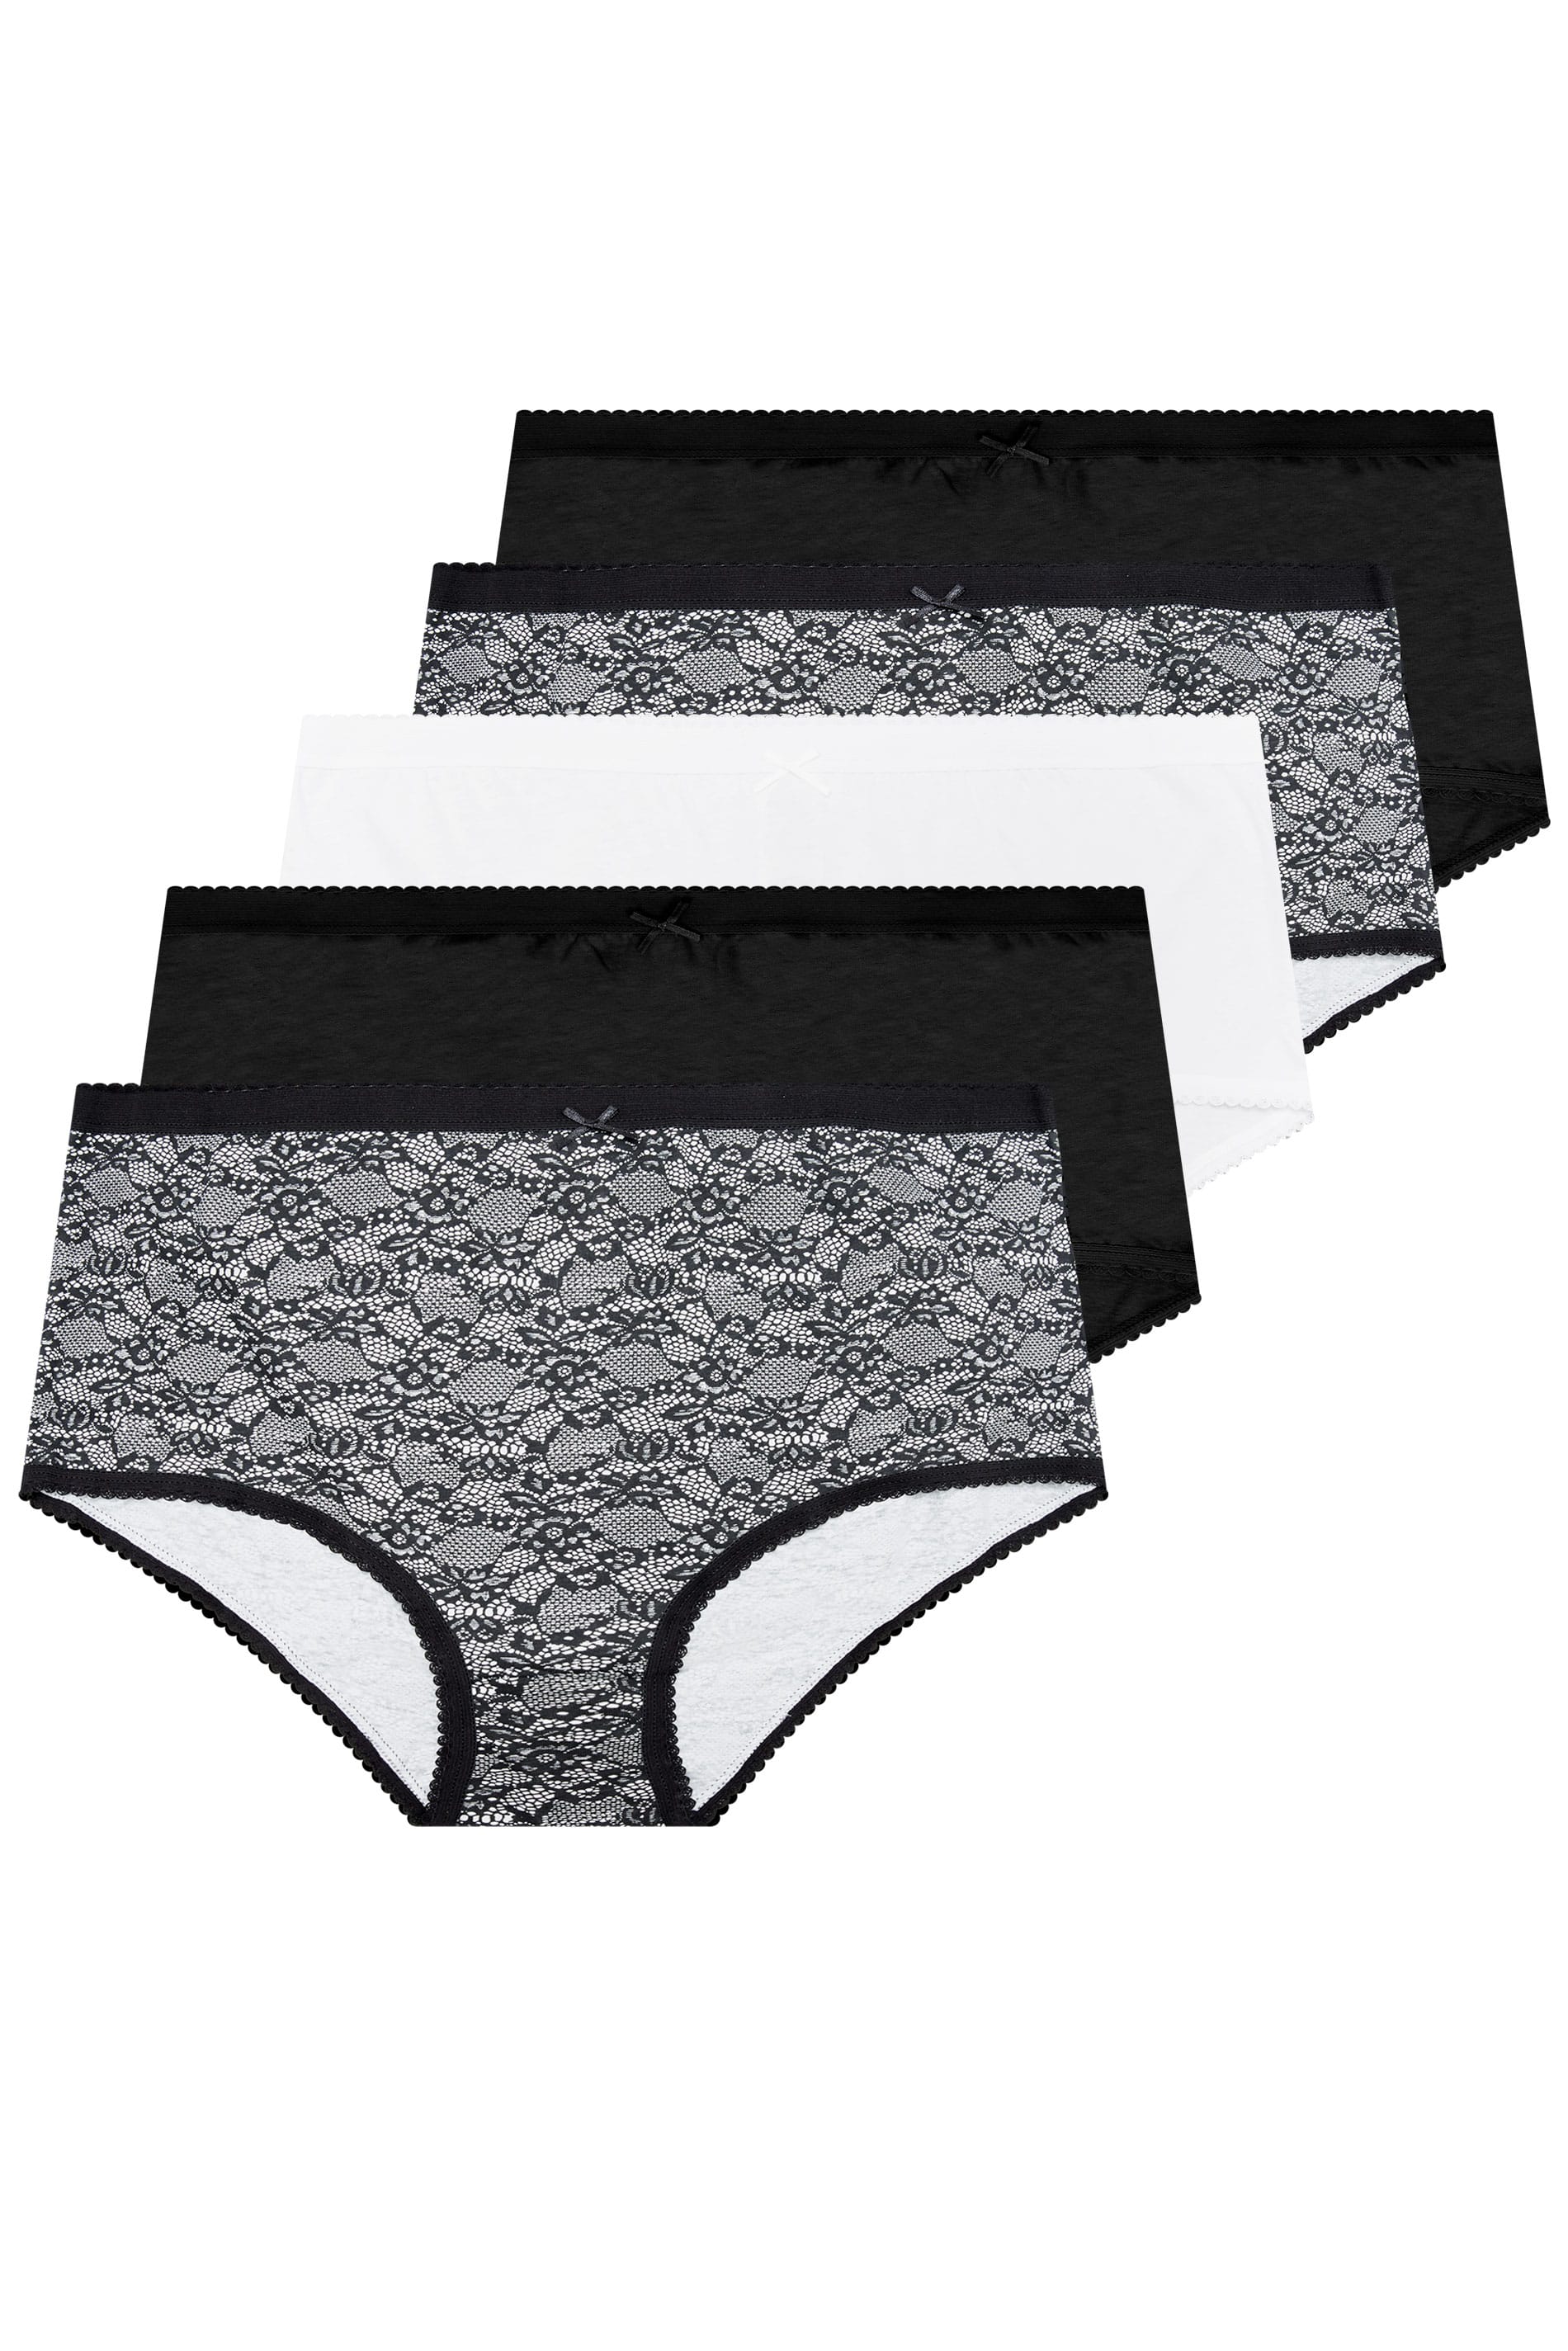 5 PACK Black & White Mono Floral Full Briefs | Yours Clothing